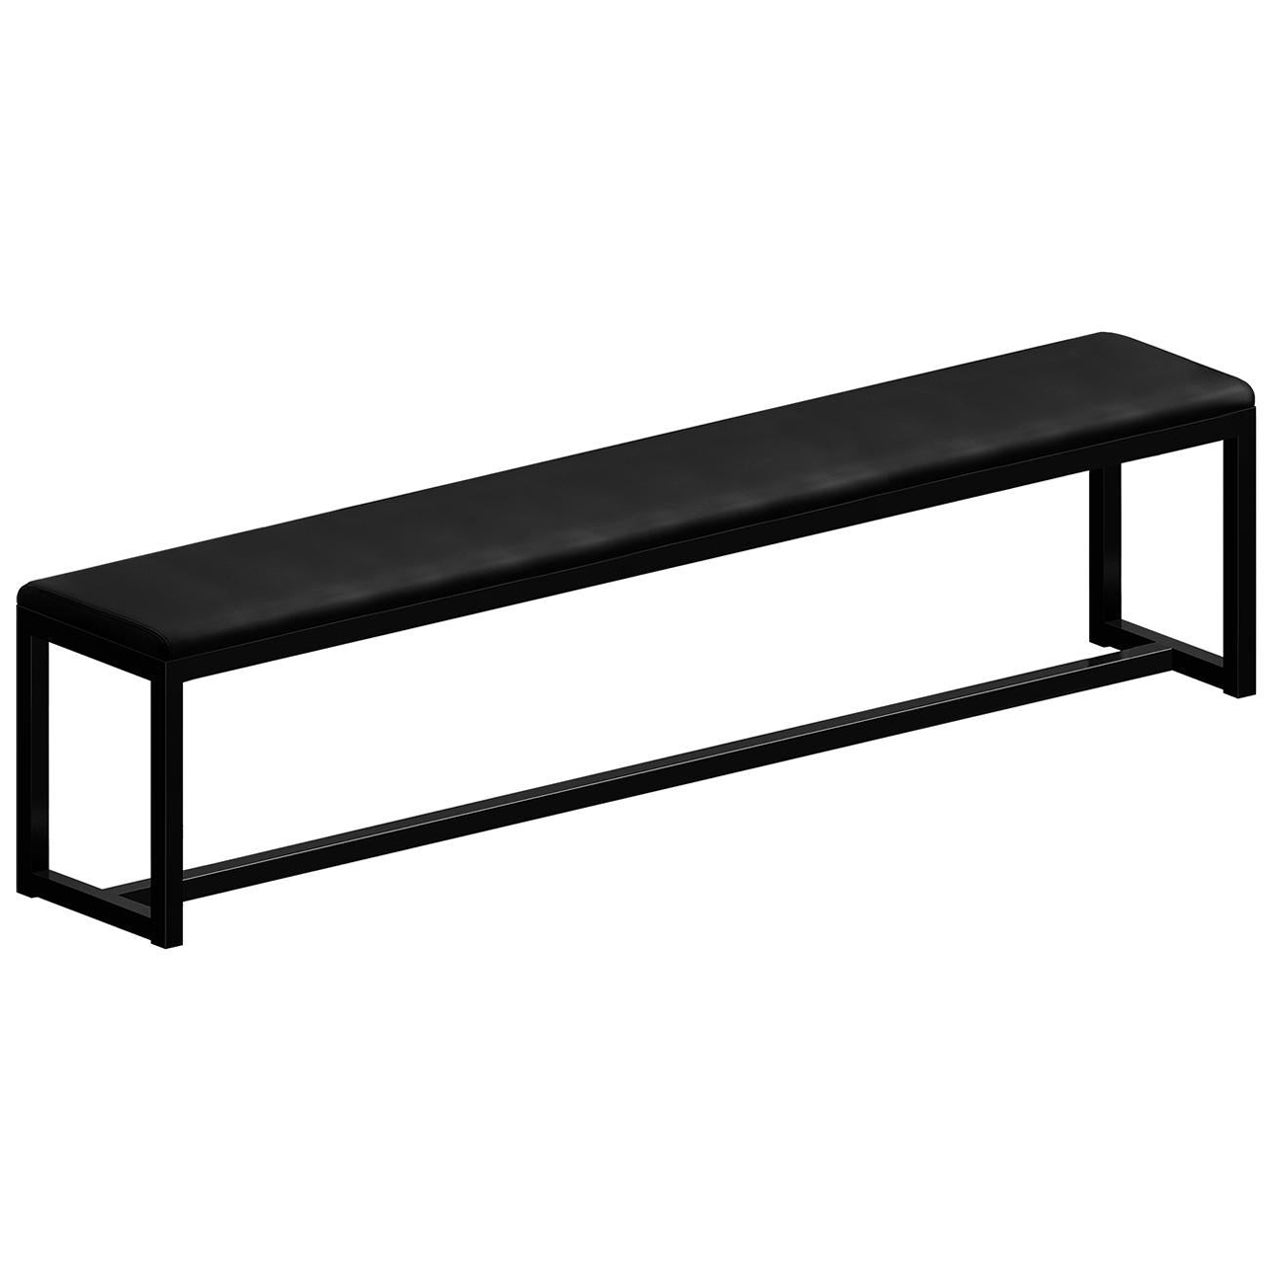 Big Brother Large Black Bench by Maurizio Peregalli For Sale